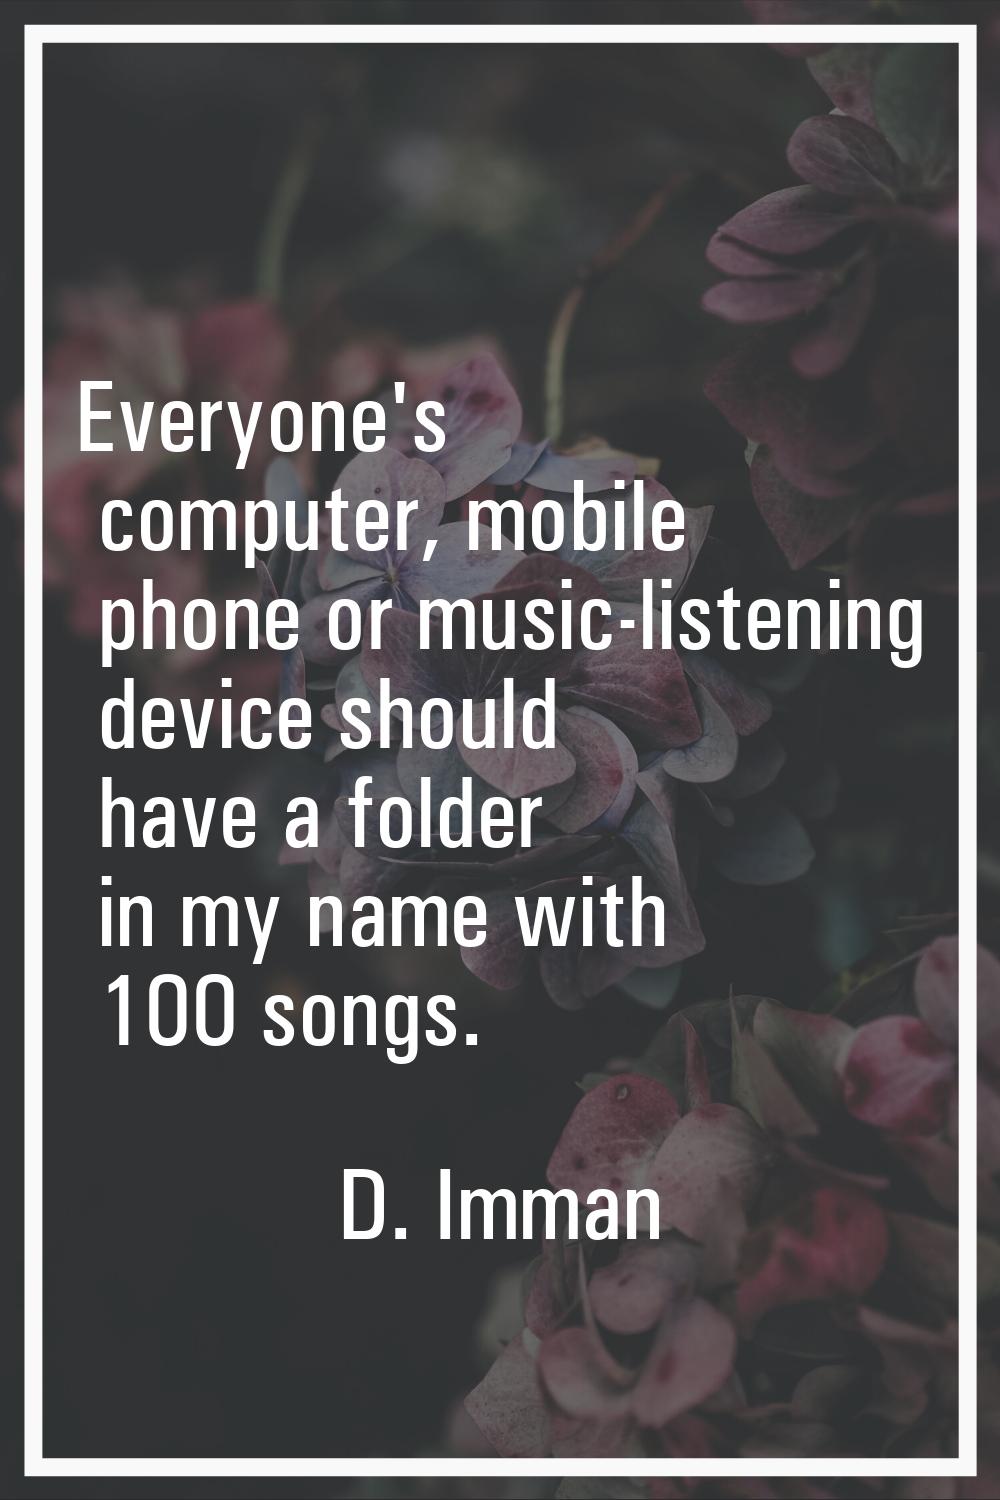 Everyone's computer, mobile phone or music-listening device should have a folder in my name with 10